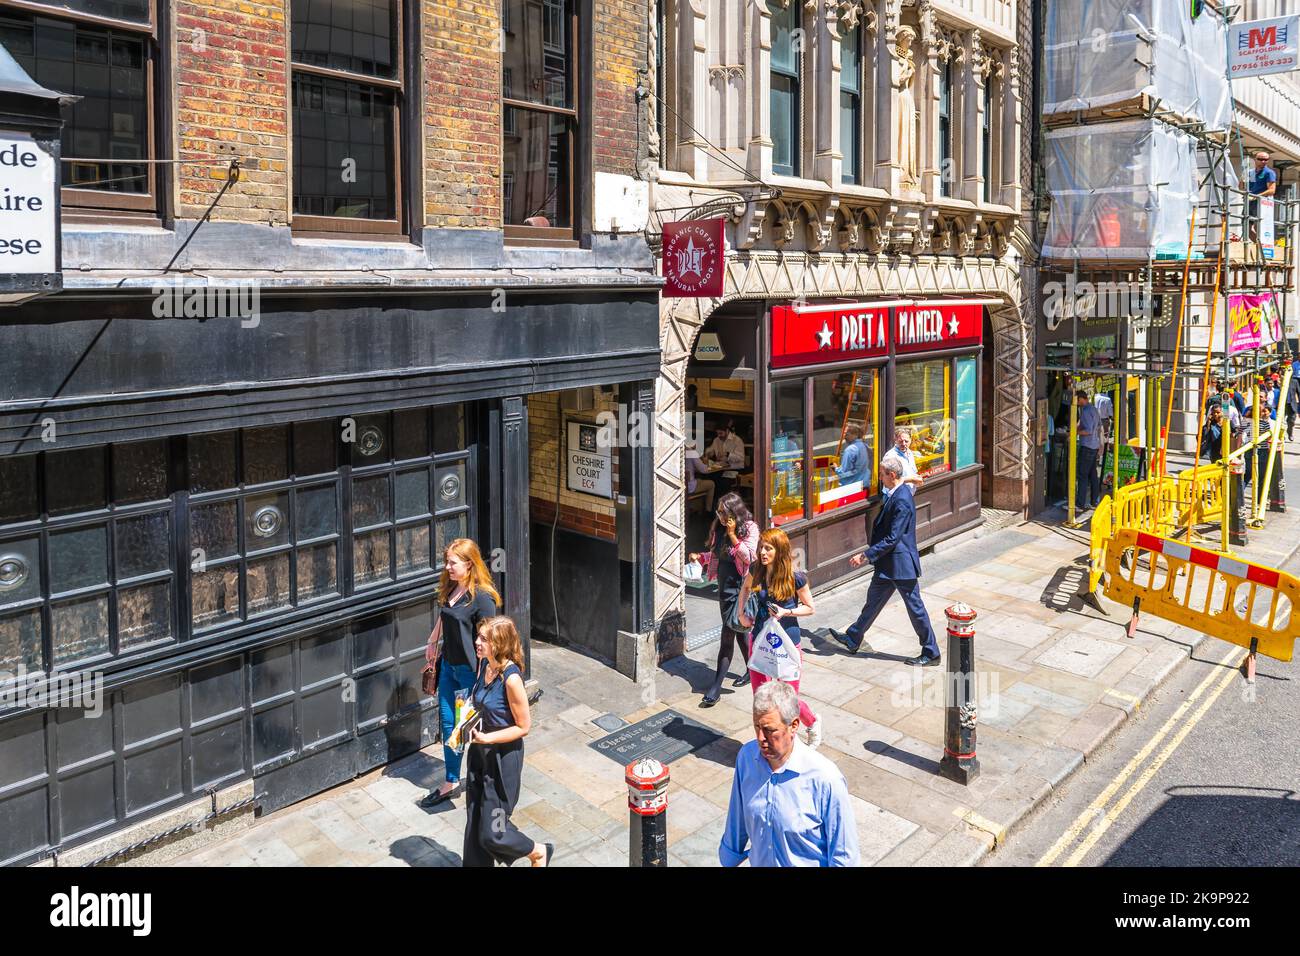 London, United Kingdom - June 22, 2018: Pret a Manger coffee cafe chain store shop restaurant with people walking on City of London Fleet street Stock Photo